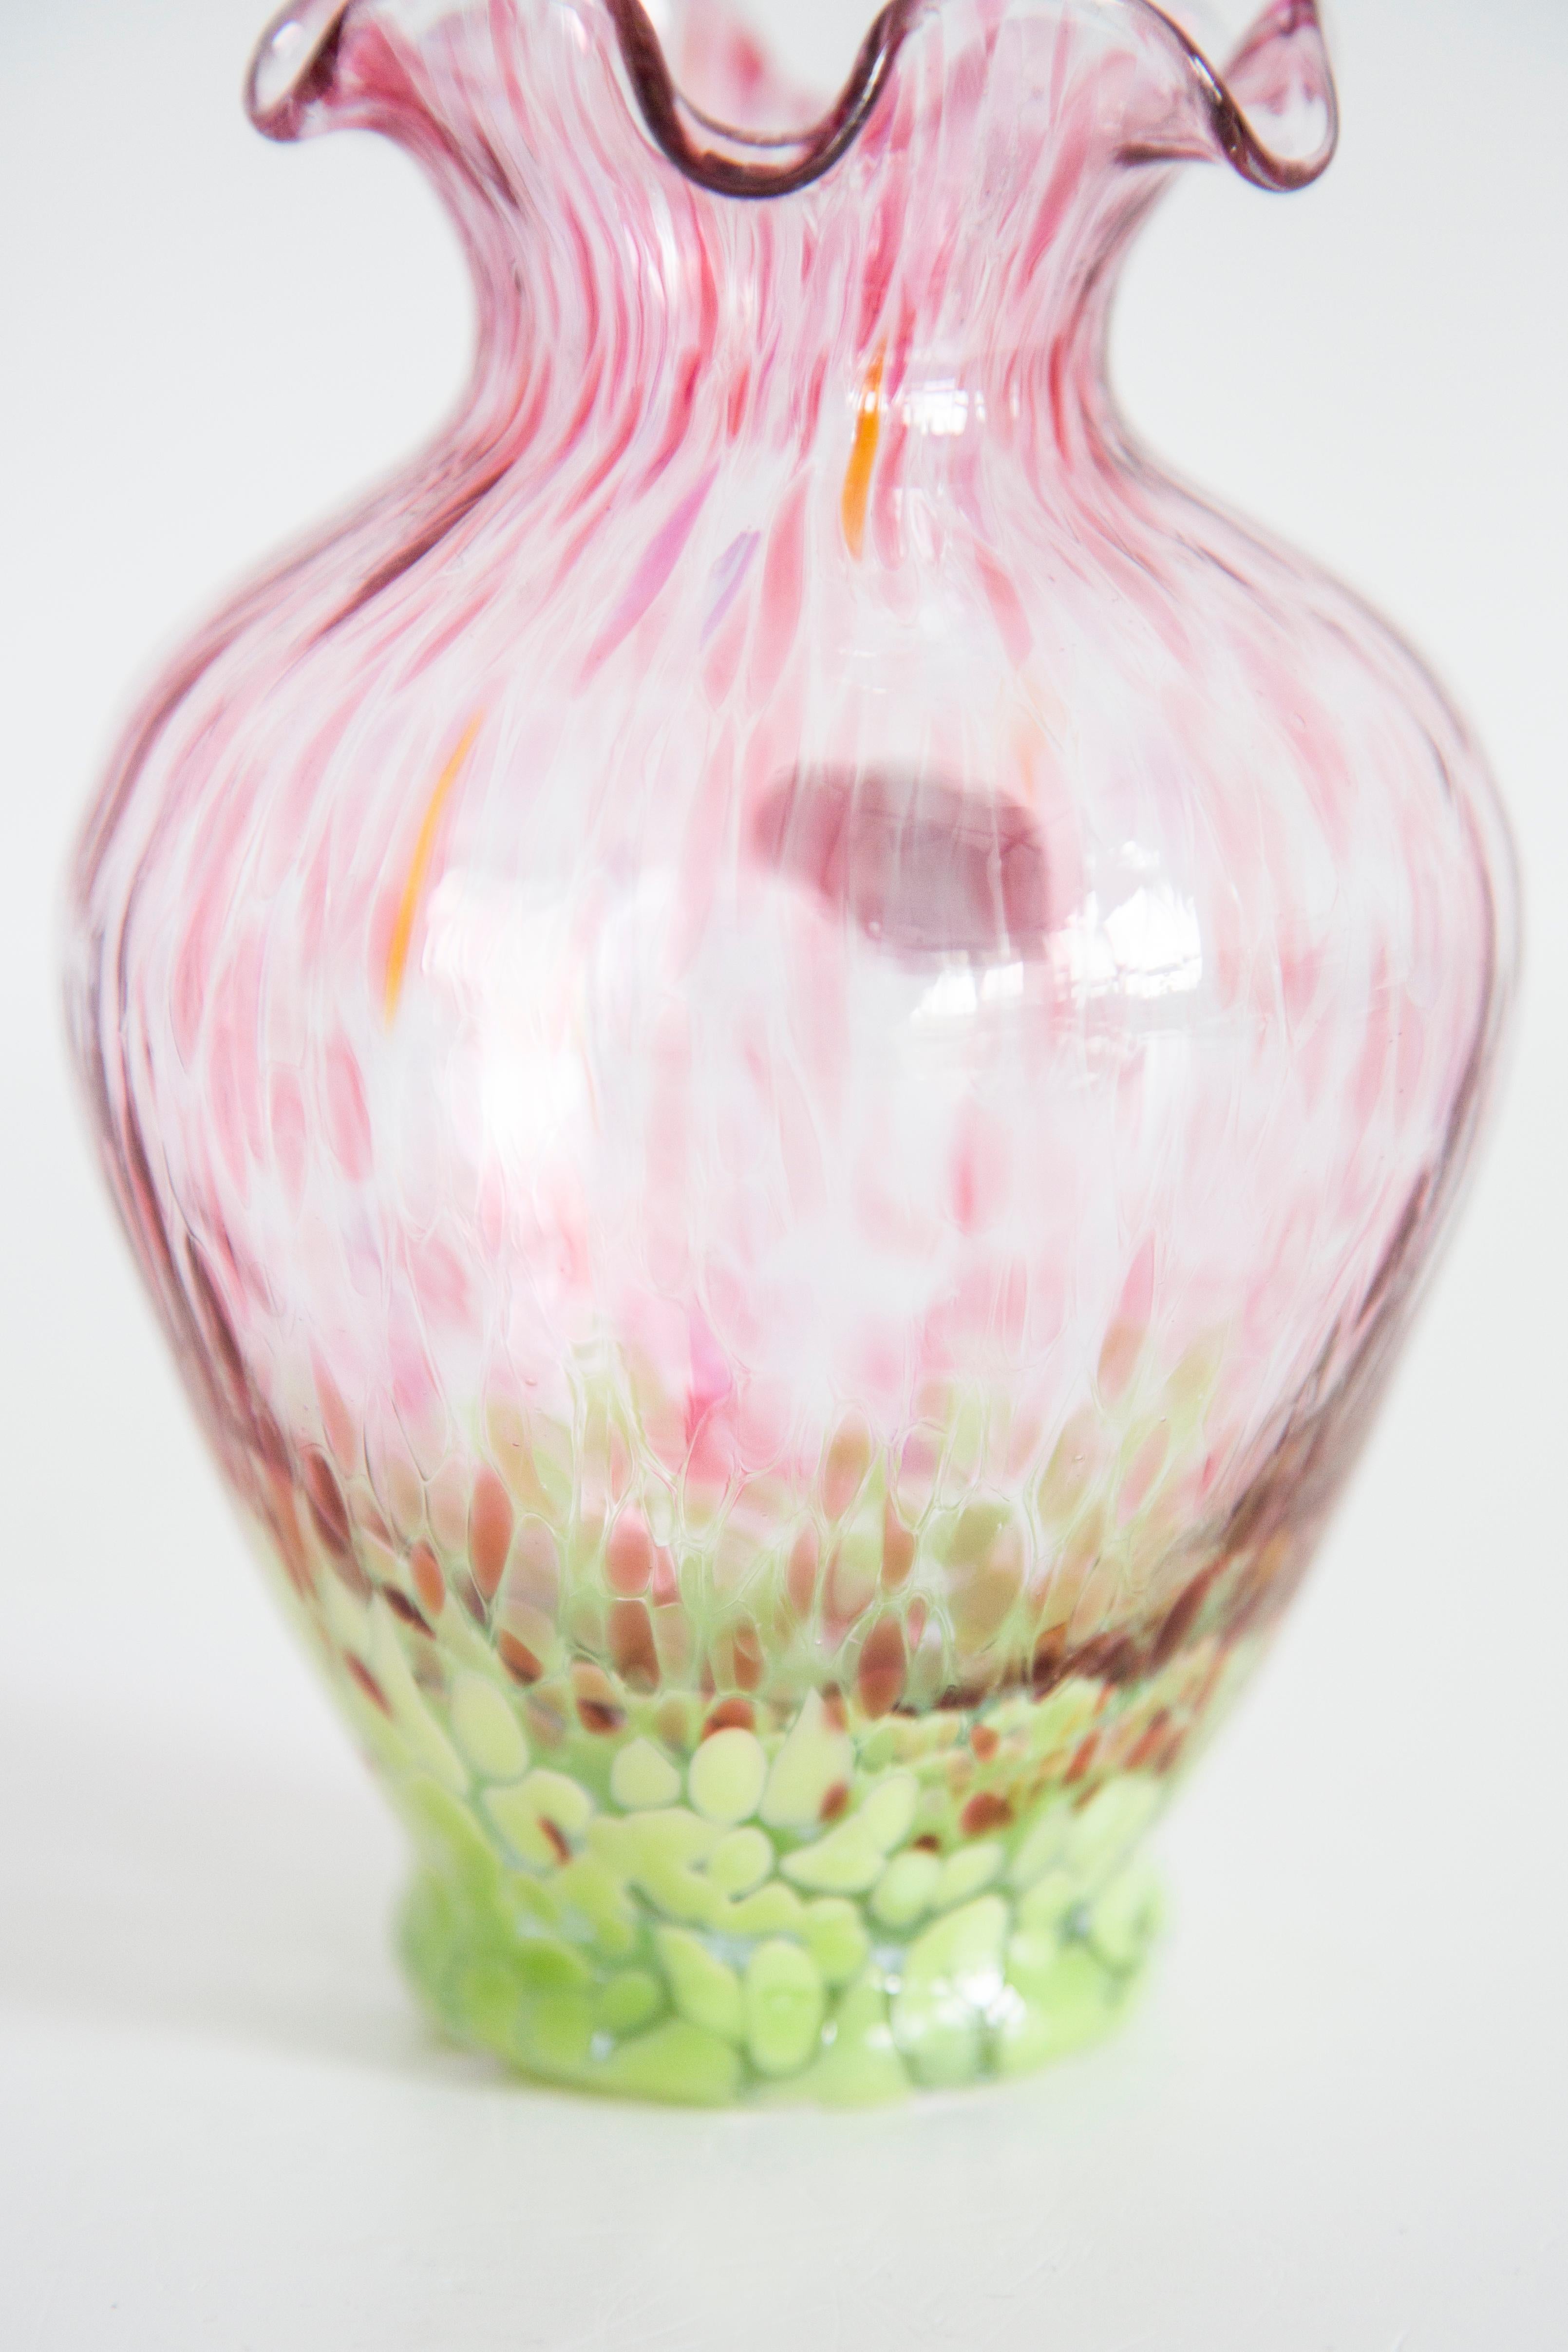 Glass Mid Century Vintage Pink and Green Small Murano Vase, Italy, 1960s For Sale